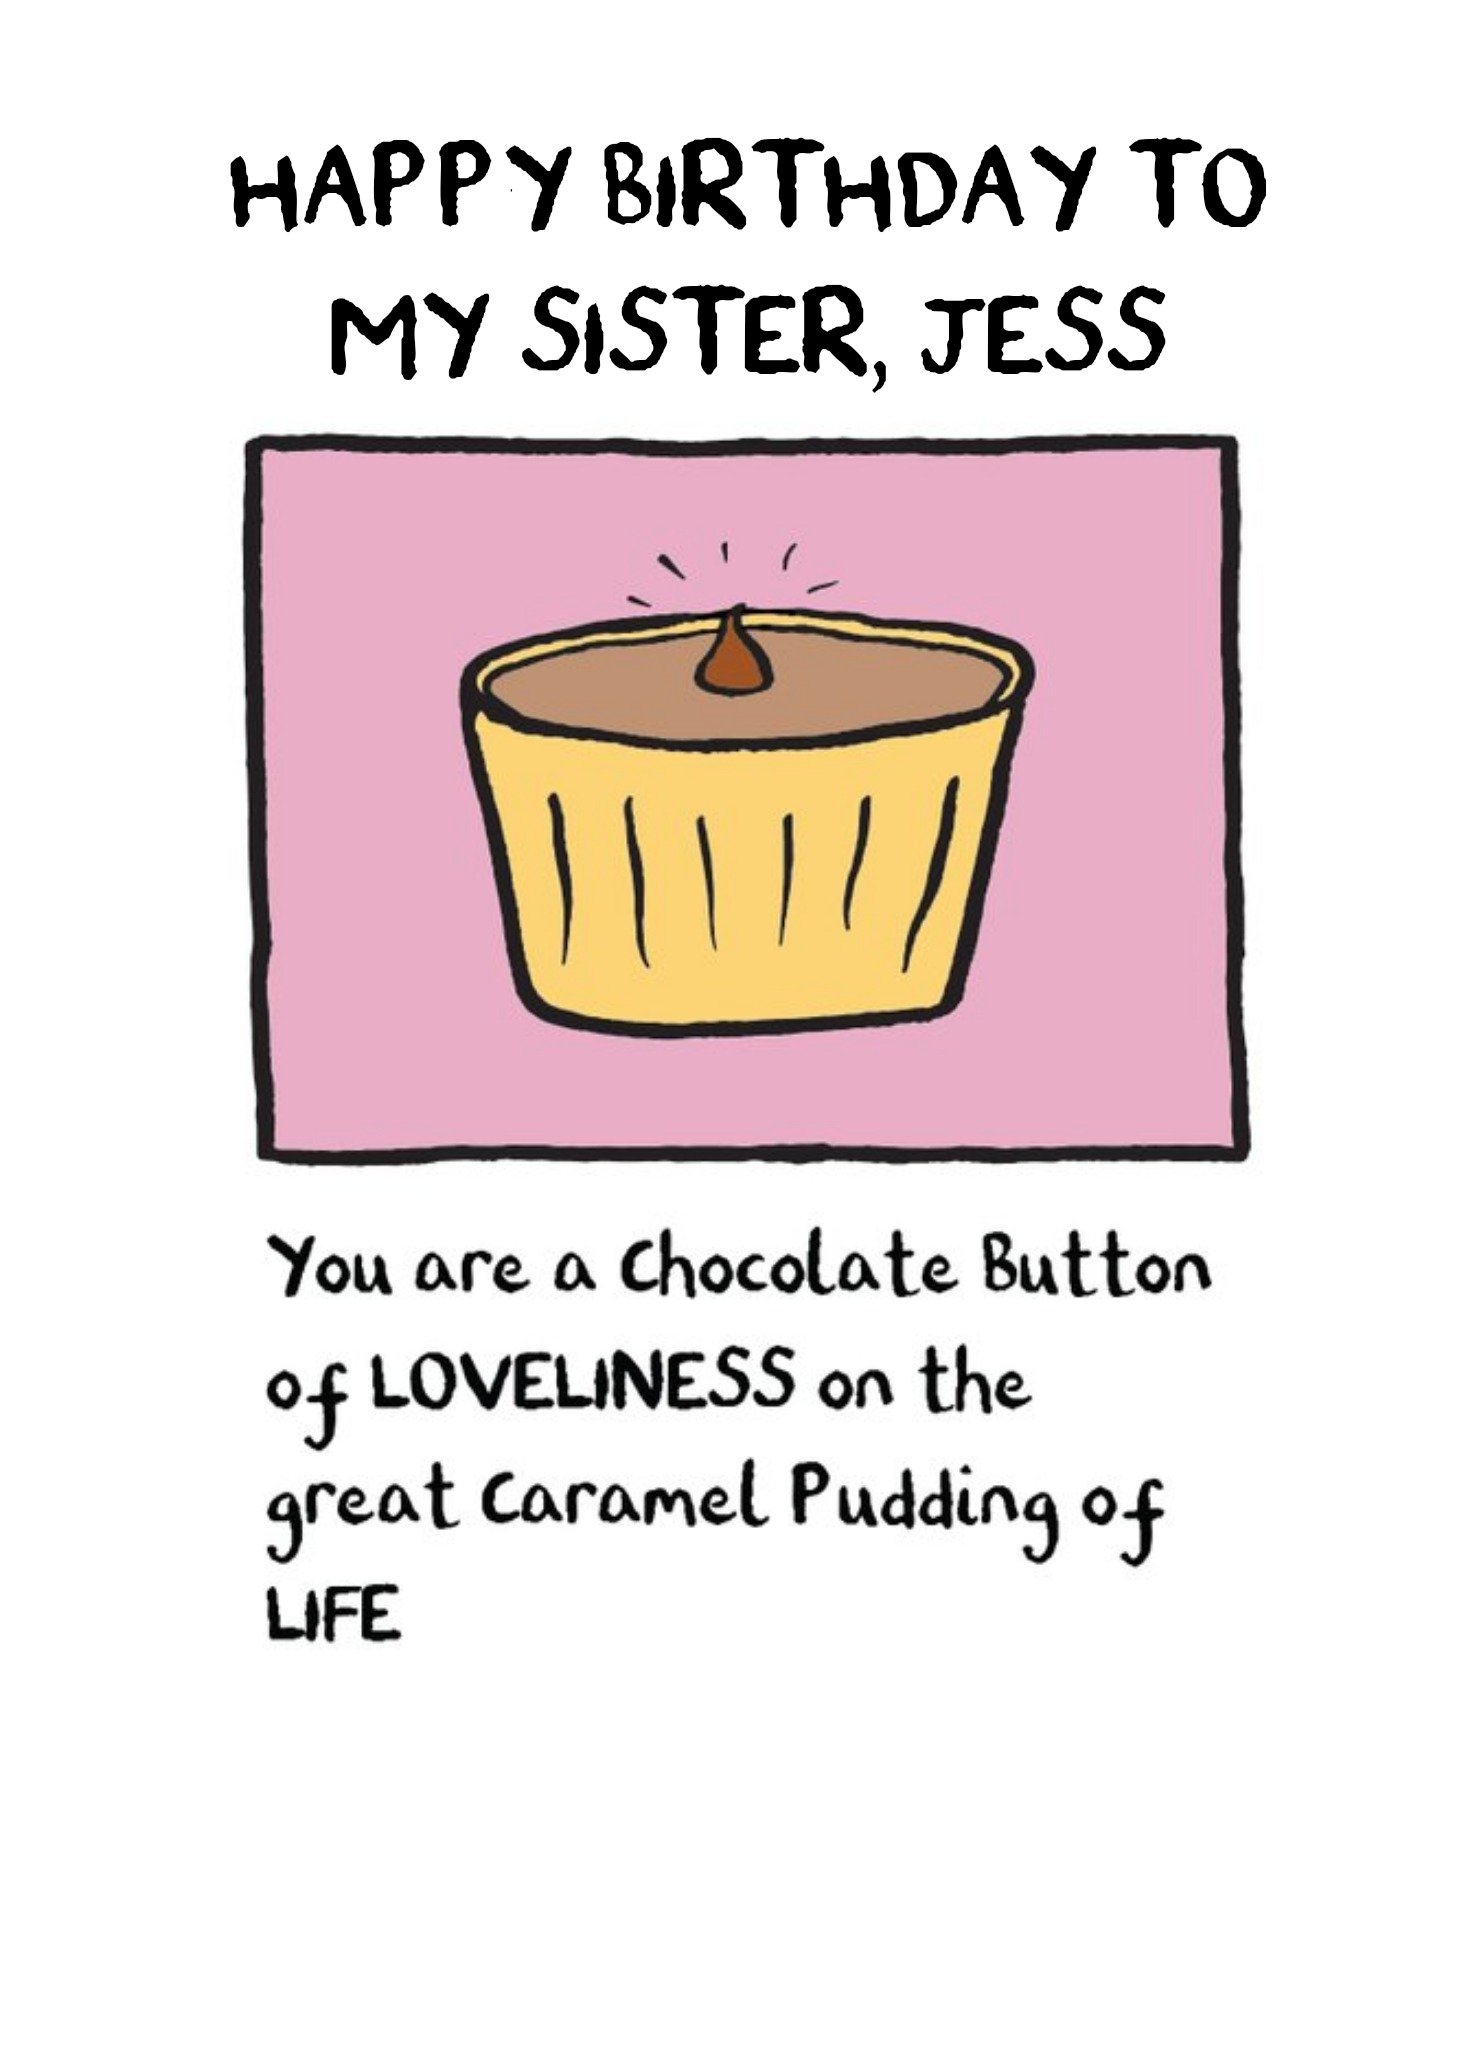 Moonpig Chocolate Button Of Loveliness On The Great Caramel Pudding Of Life Birthday Card For Sister